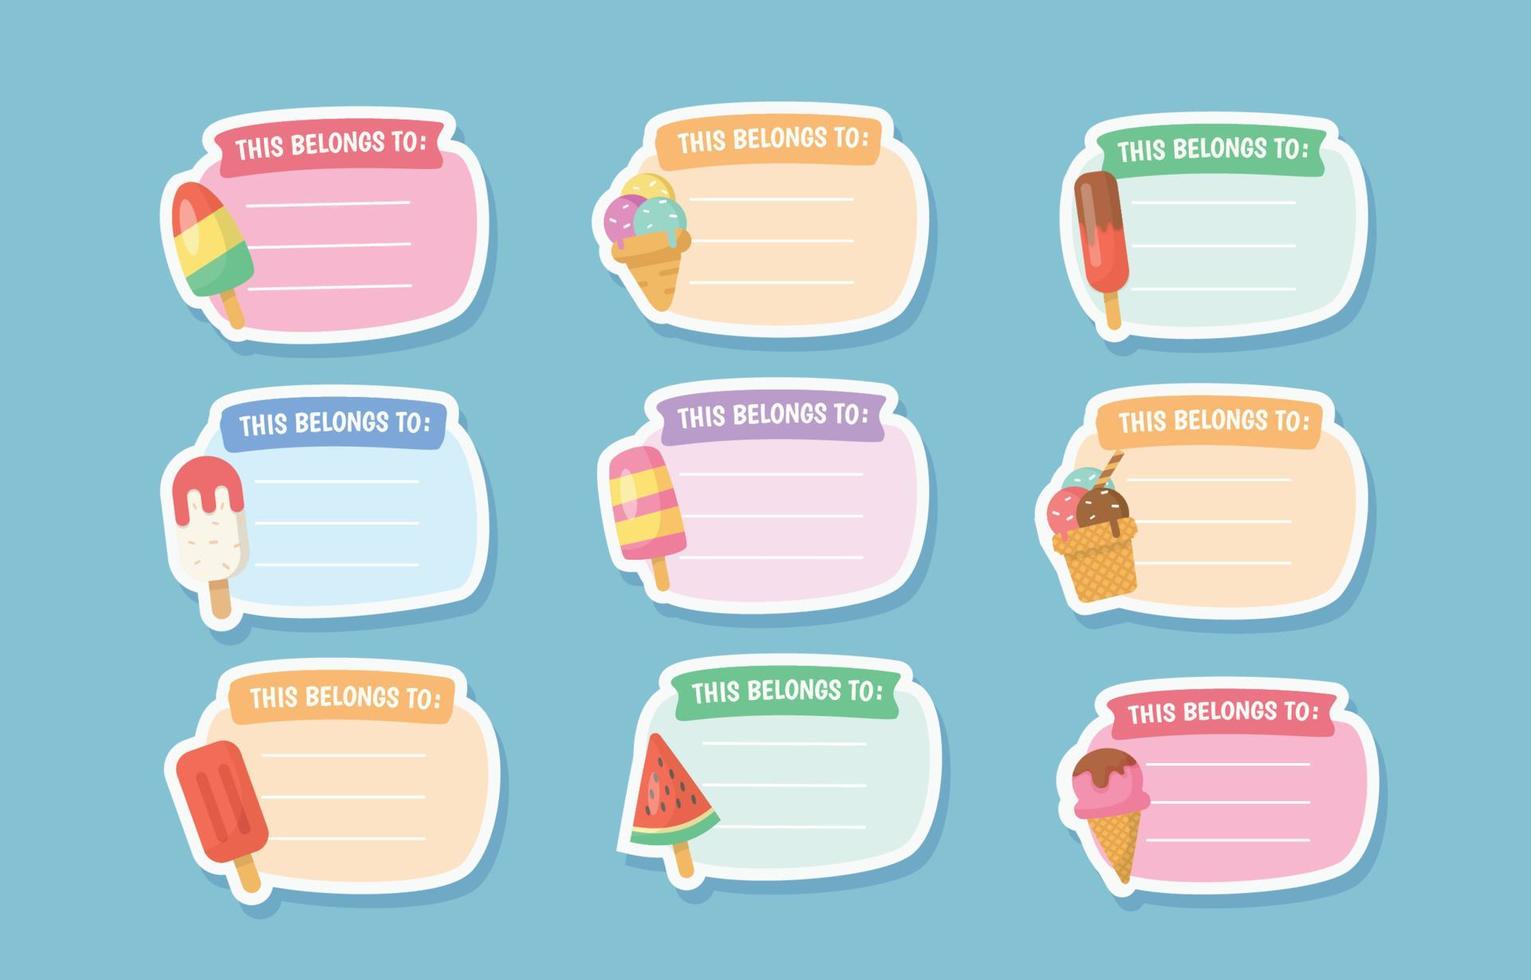 Belongs to Popsicle Ice Cream Sticker Collection vector